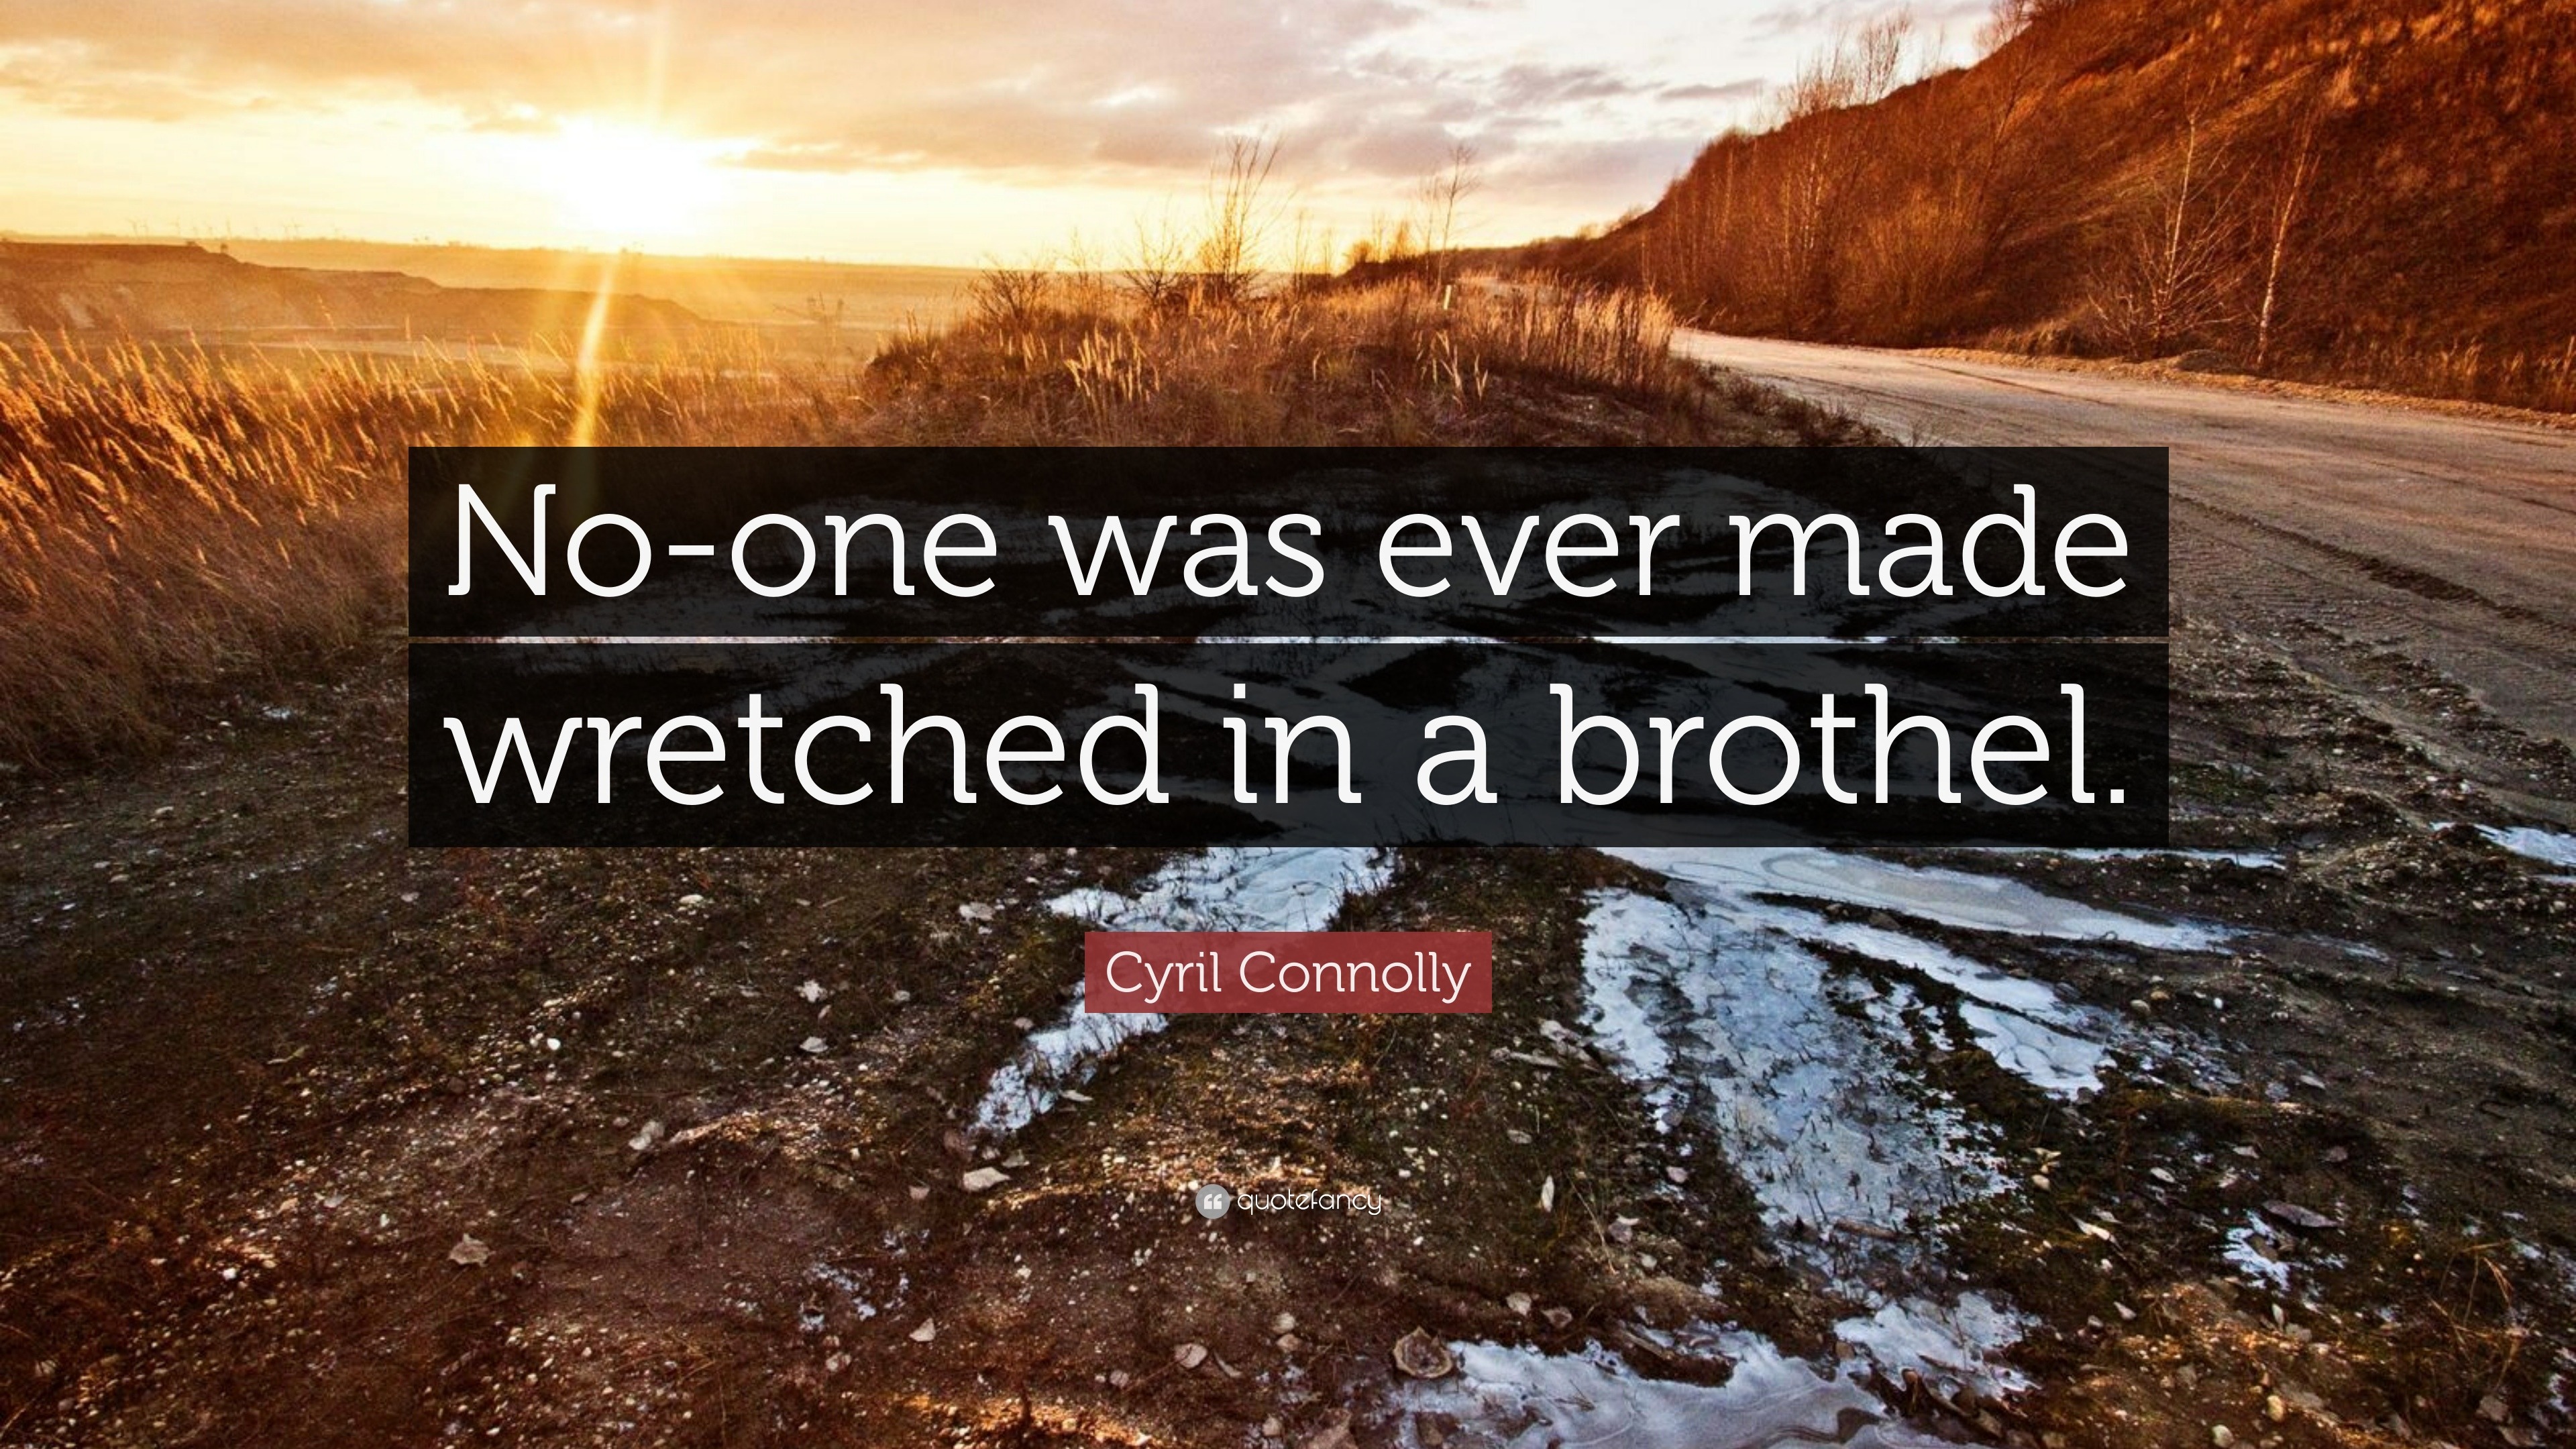 Cyril Connolly Quote “no One Was Ever Made Wretched In A Brothel”